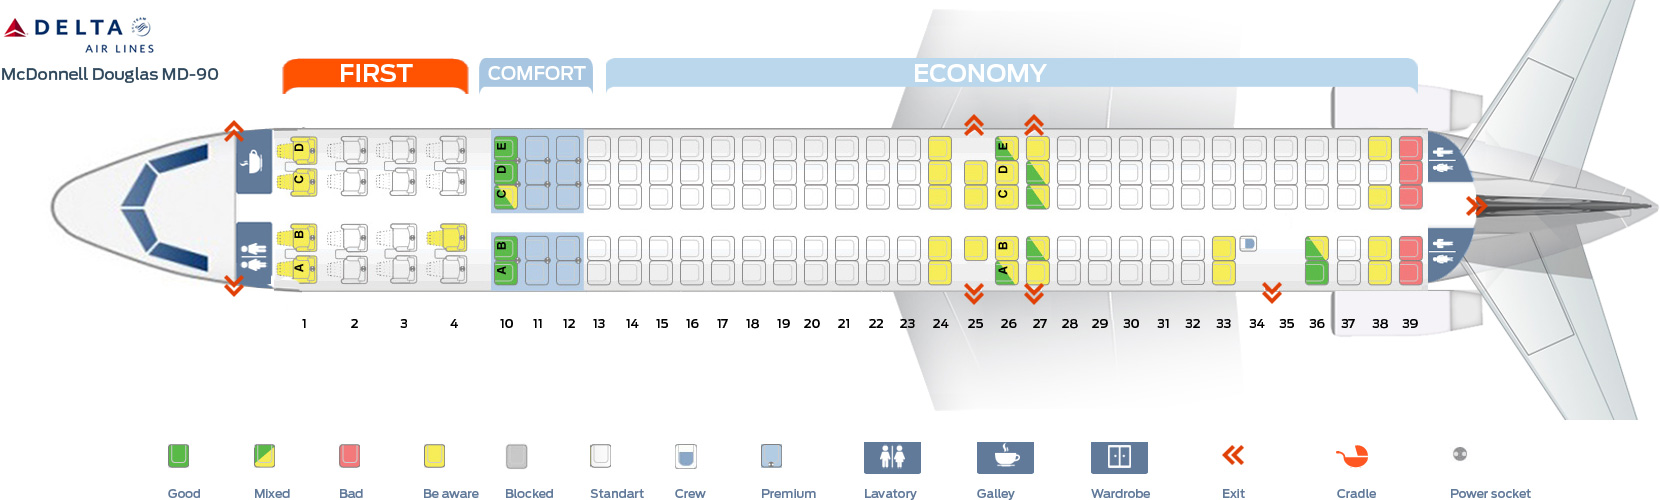 Delta 27 Seating Chart